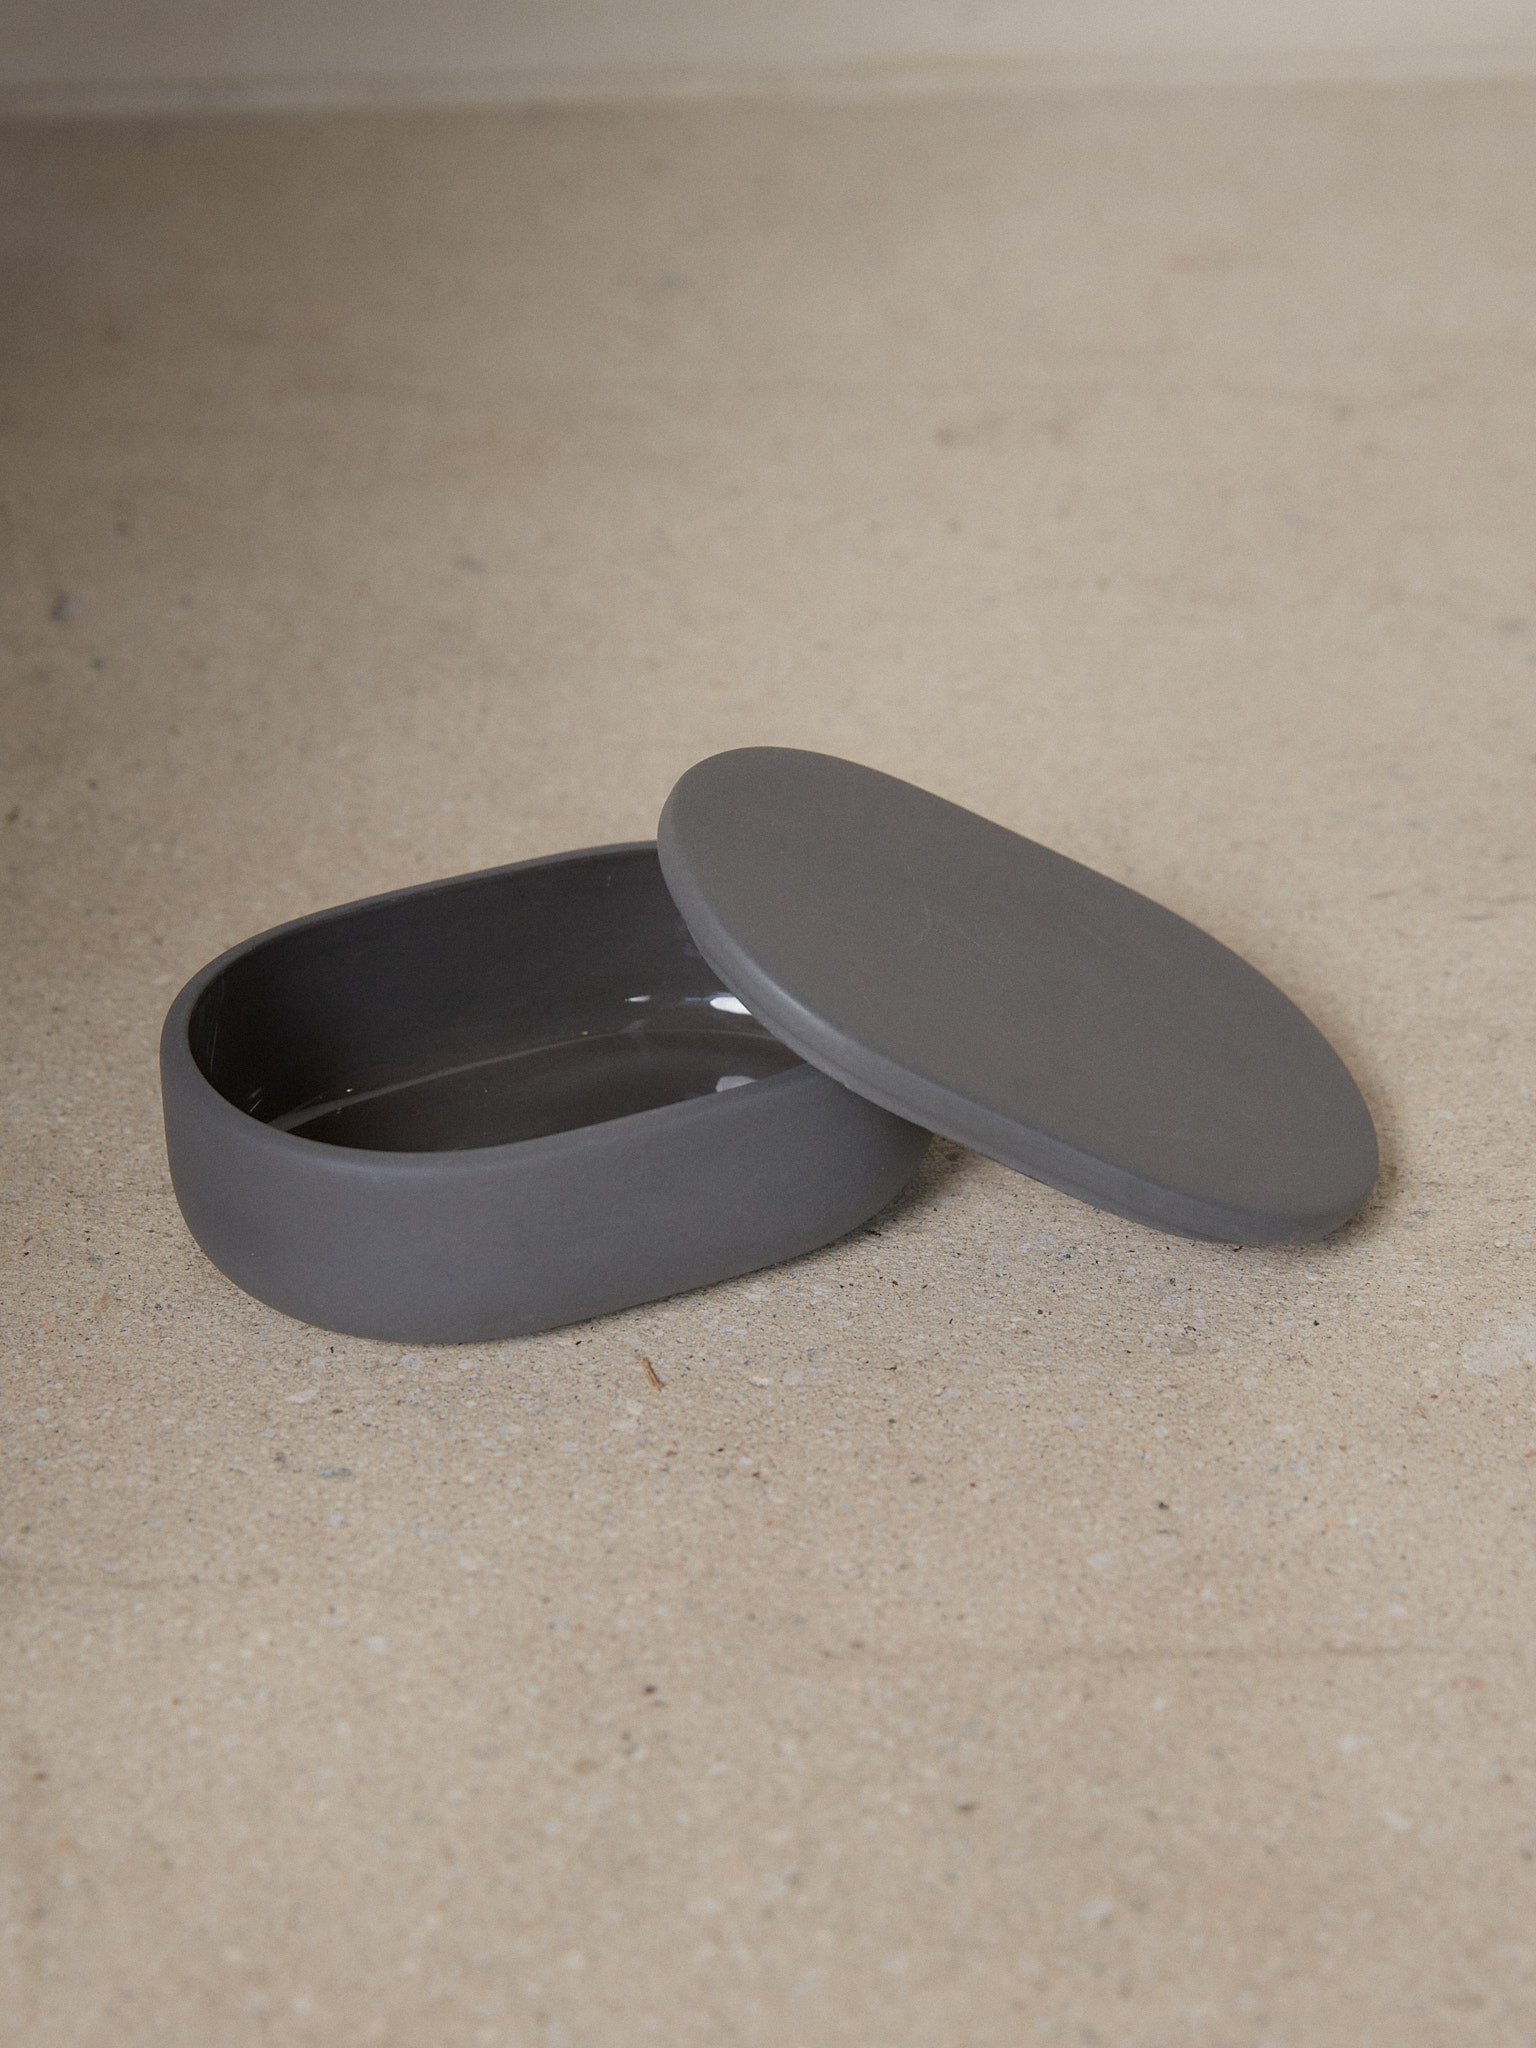 Small Cose Oval Box. A study in refined simplicity, the Cose Oval Box by Bertrand Lejoly for Serax adds subtle luxury to any bathroom or kitchen. 